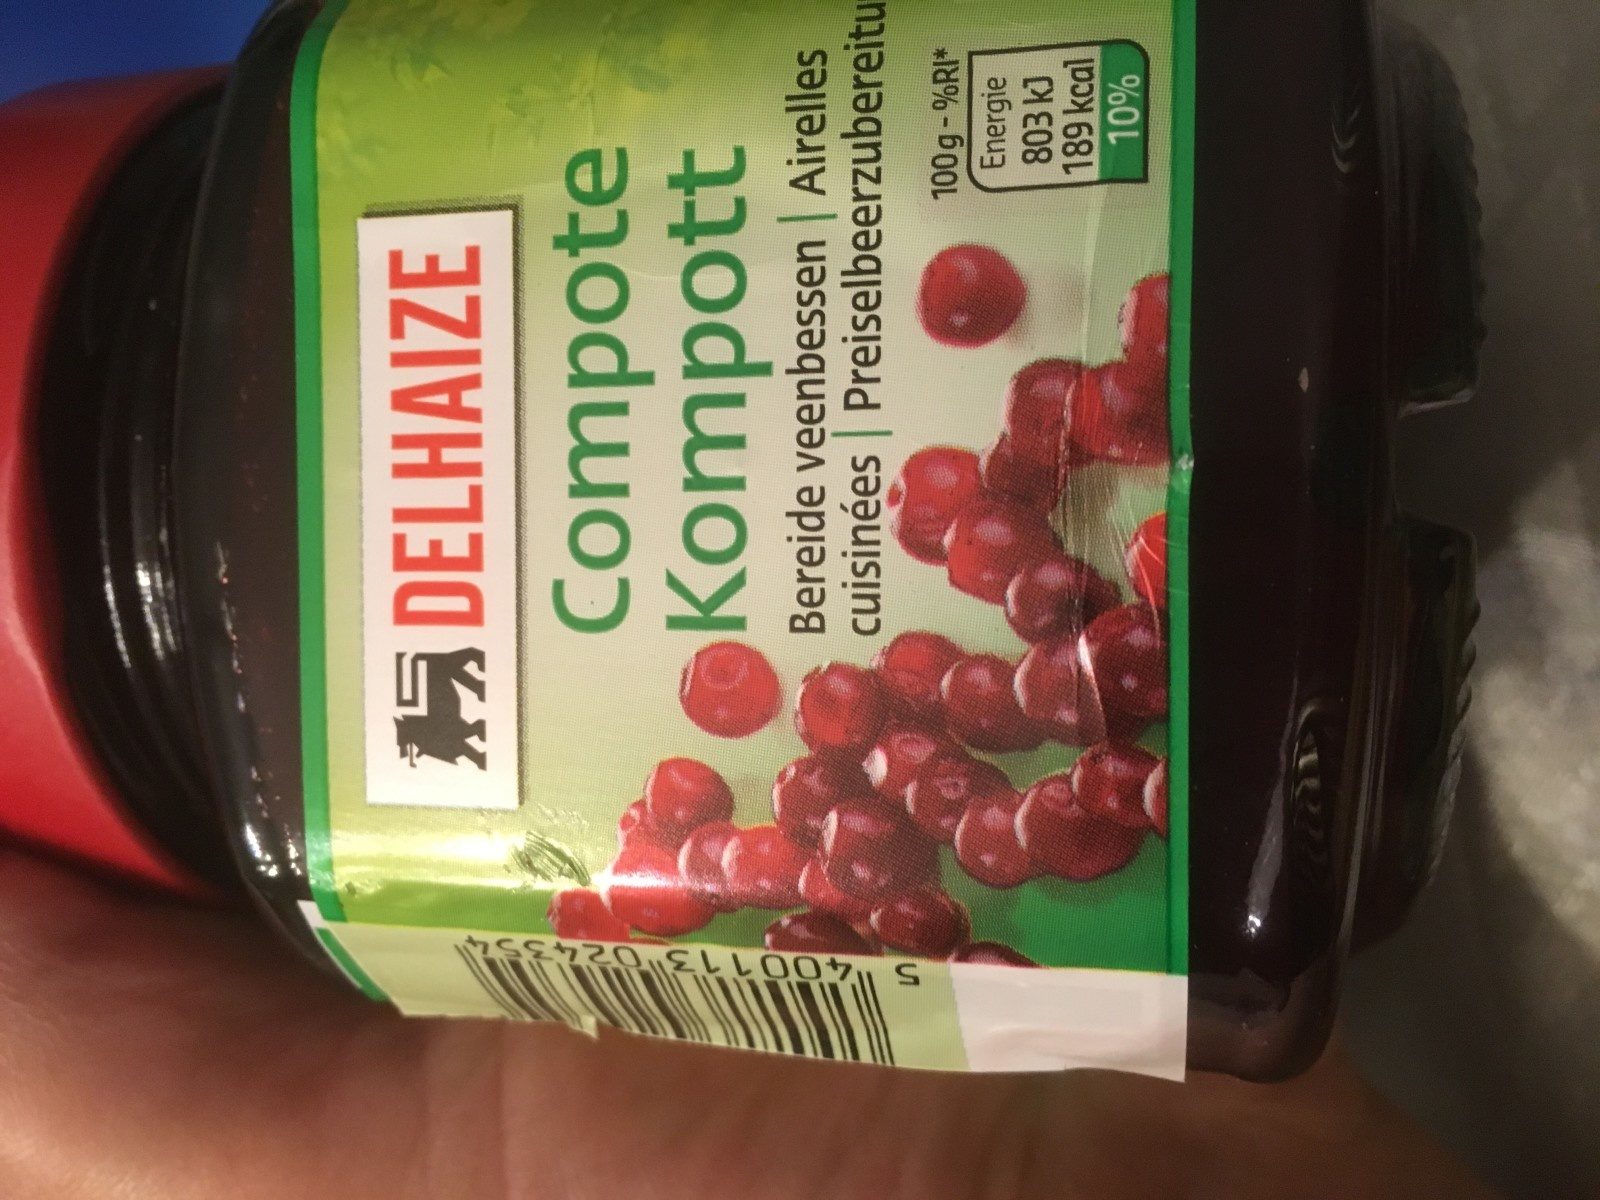 Compote airelles - Ingredients - fr